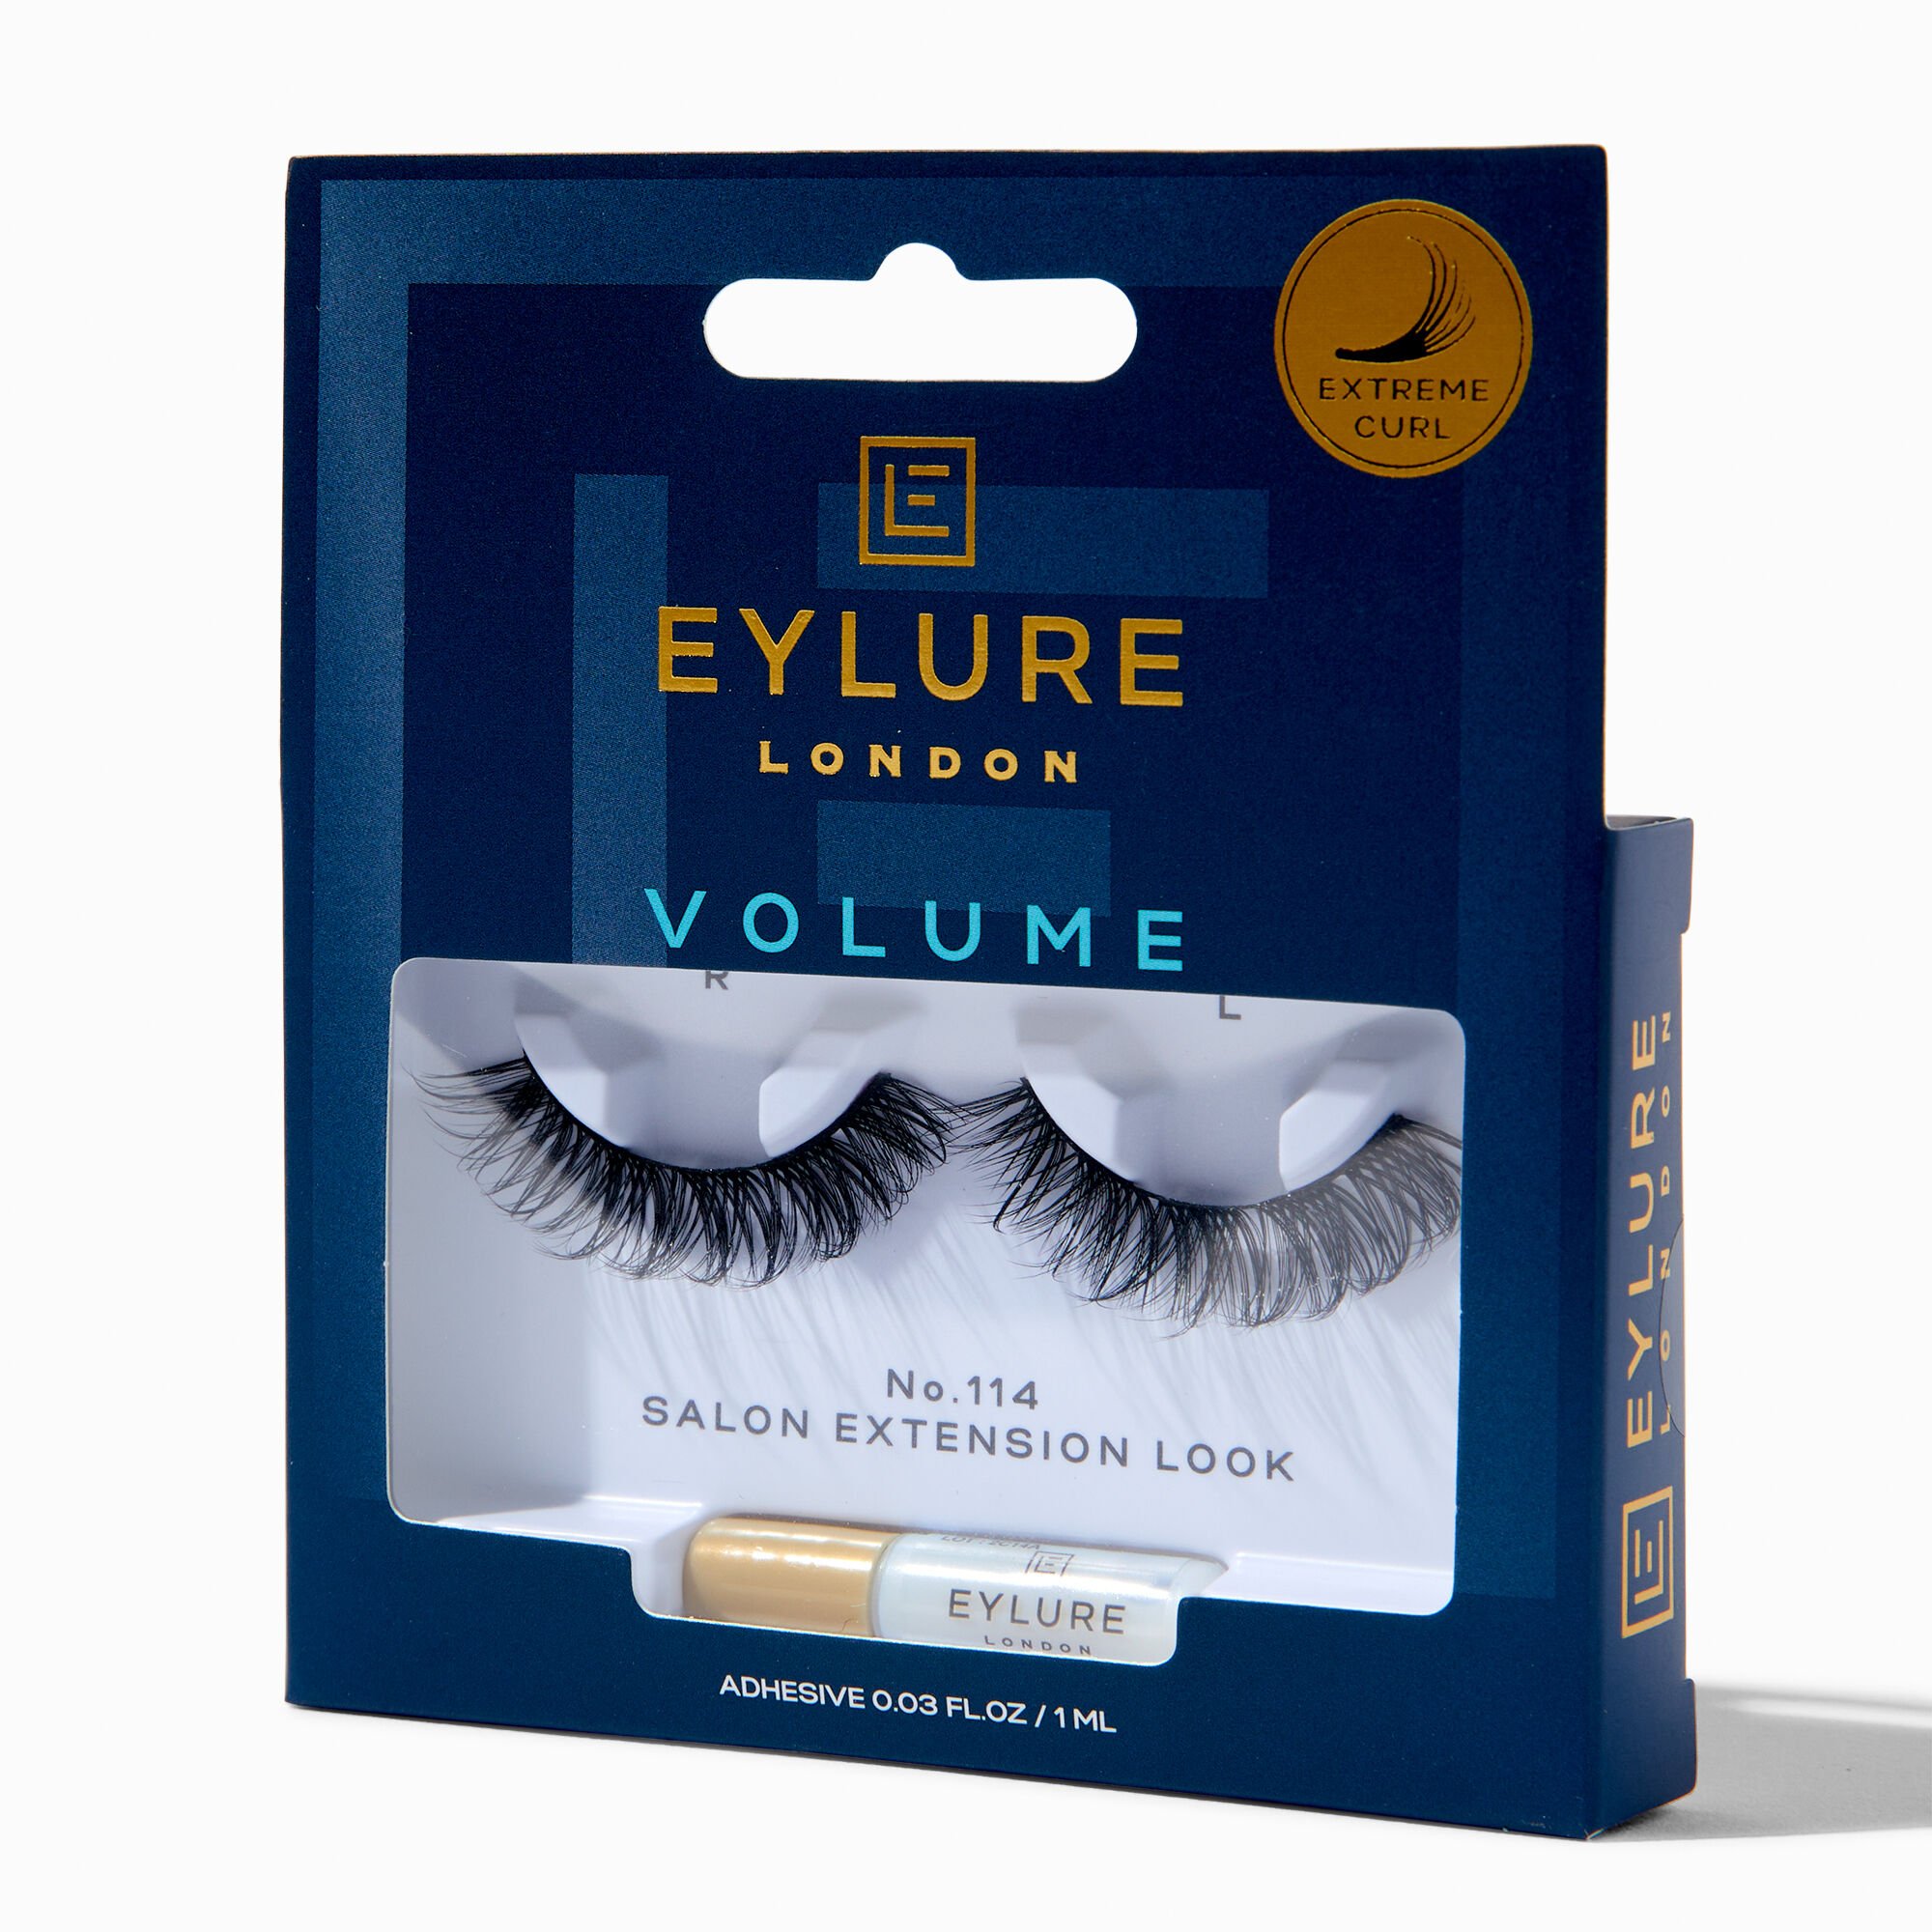 View Claires Eylure Volume Extreme Curl False Lashes No 114 information